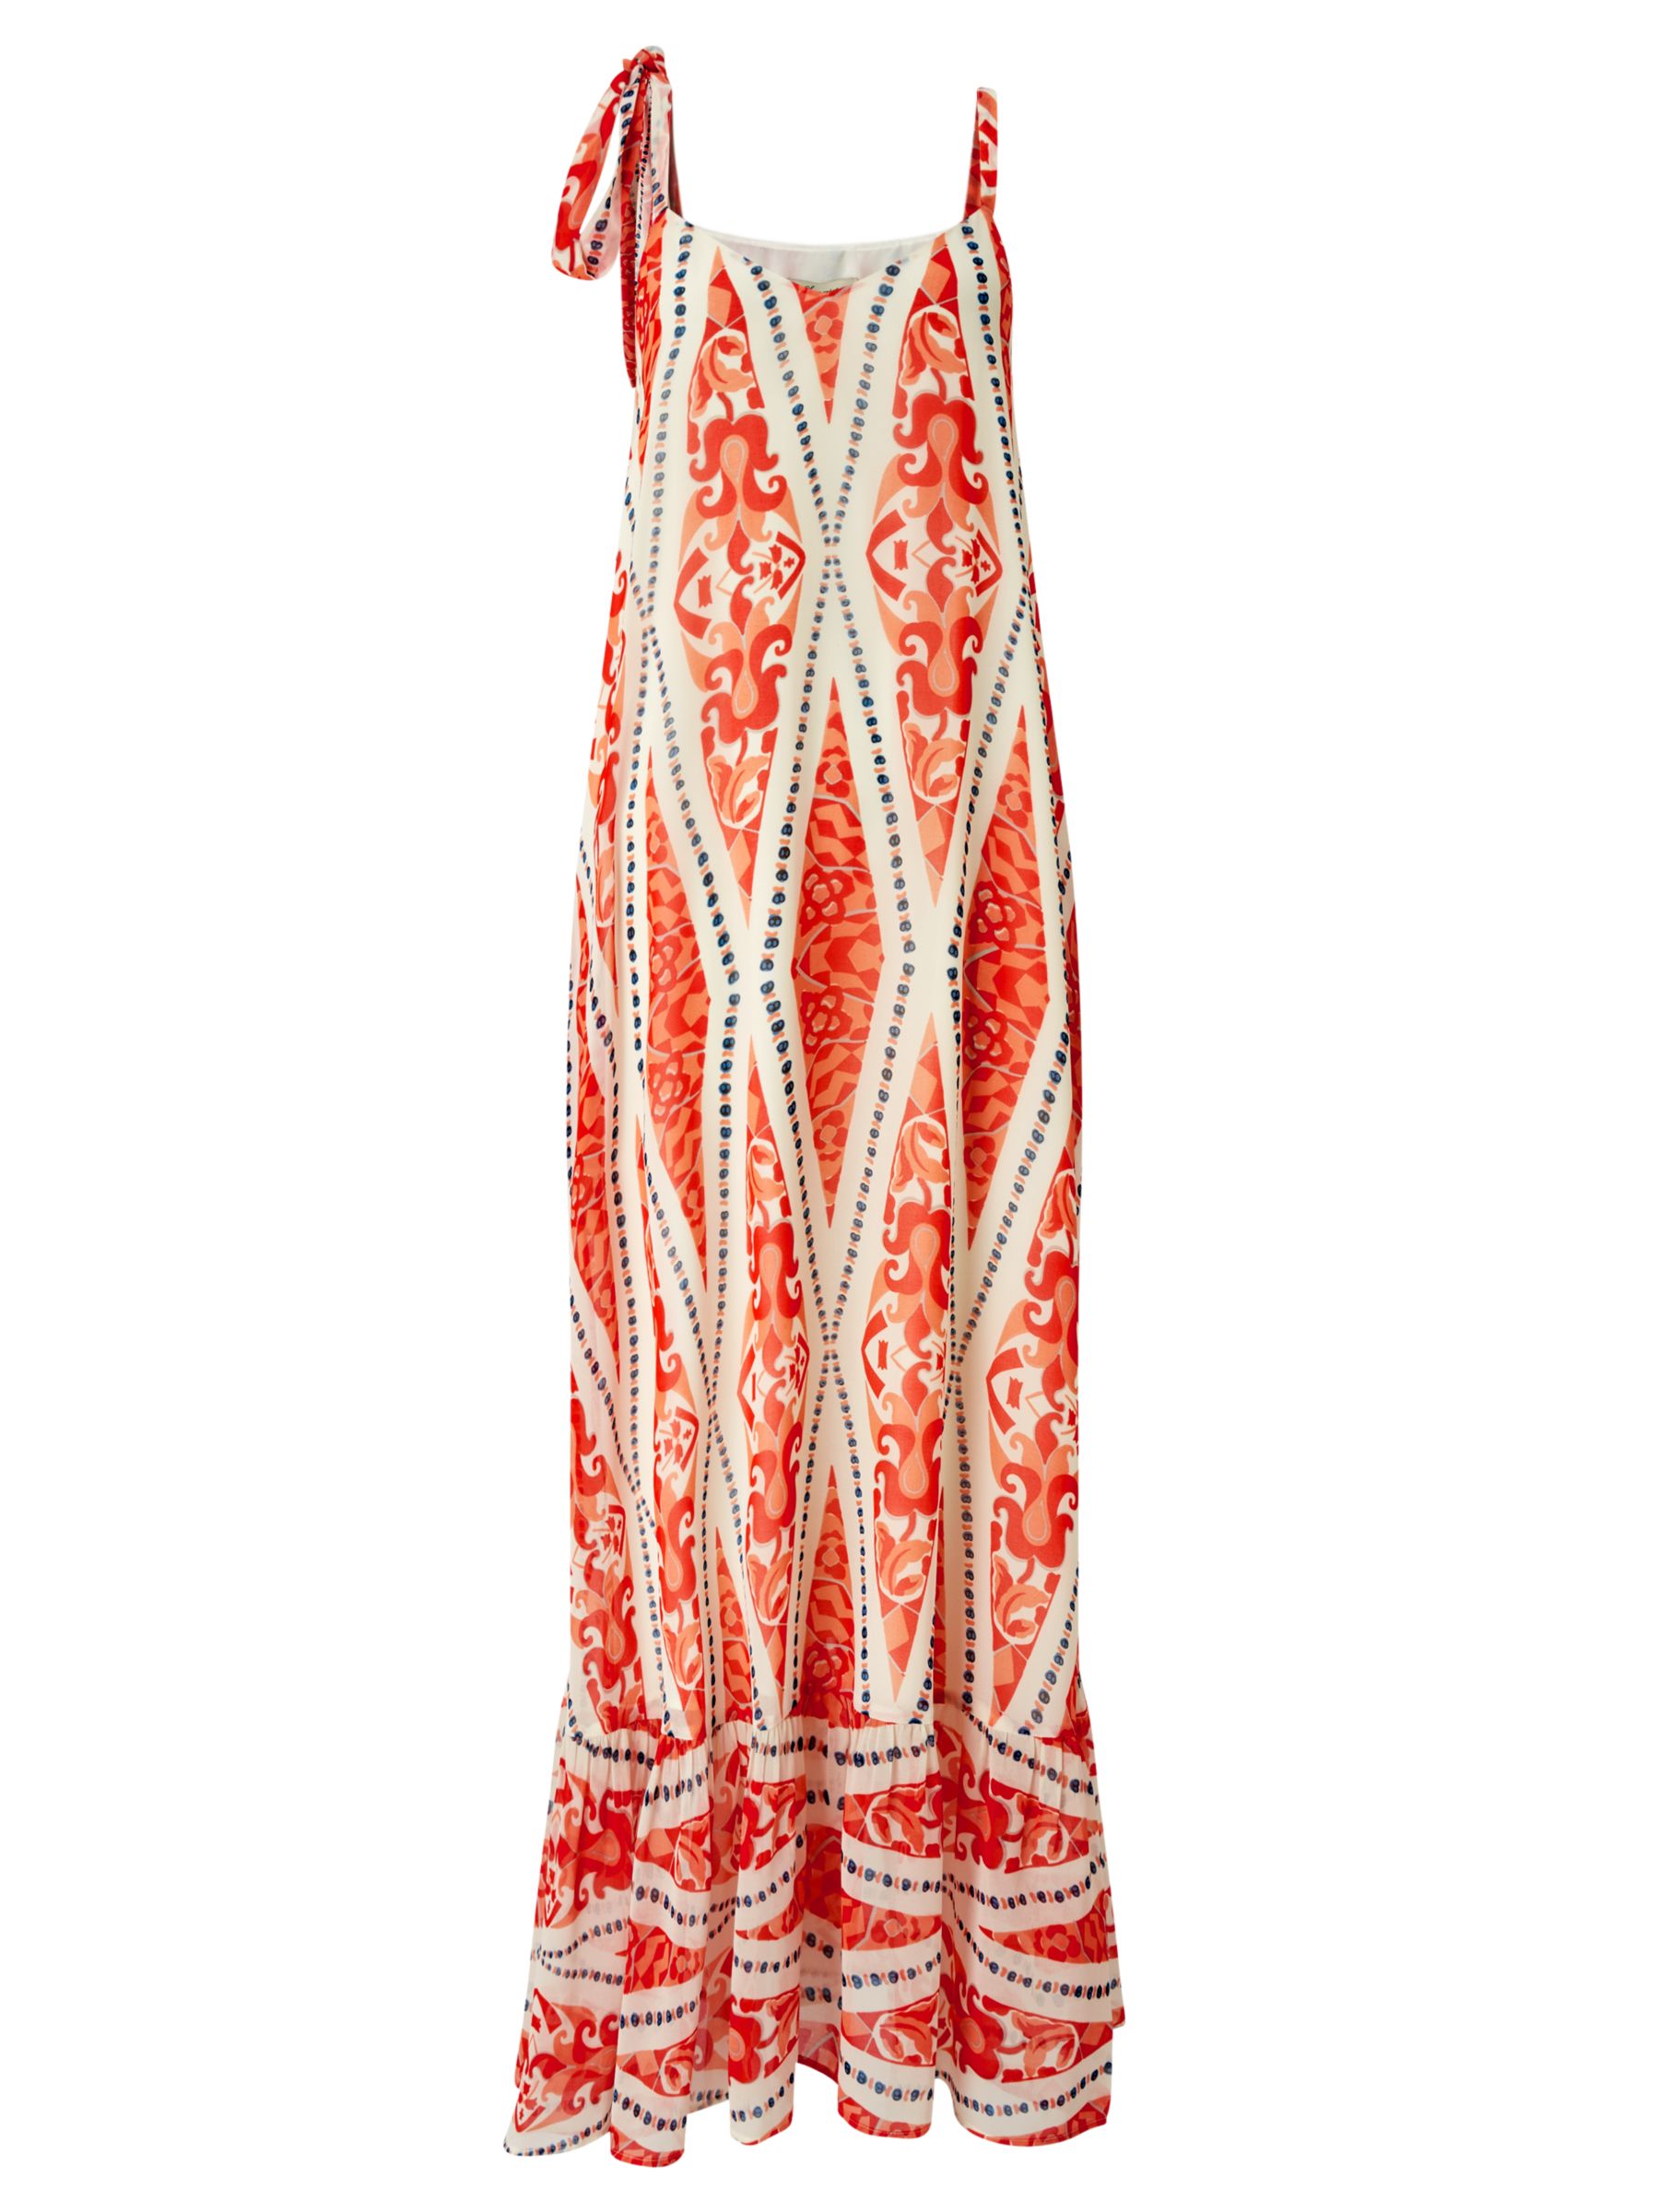 Somerset by Alice Temperley Deco Print Long Dress, Red at John Lewis ...